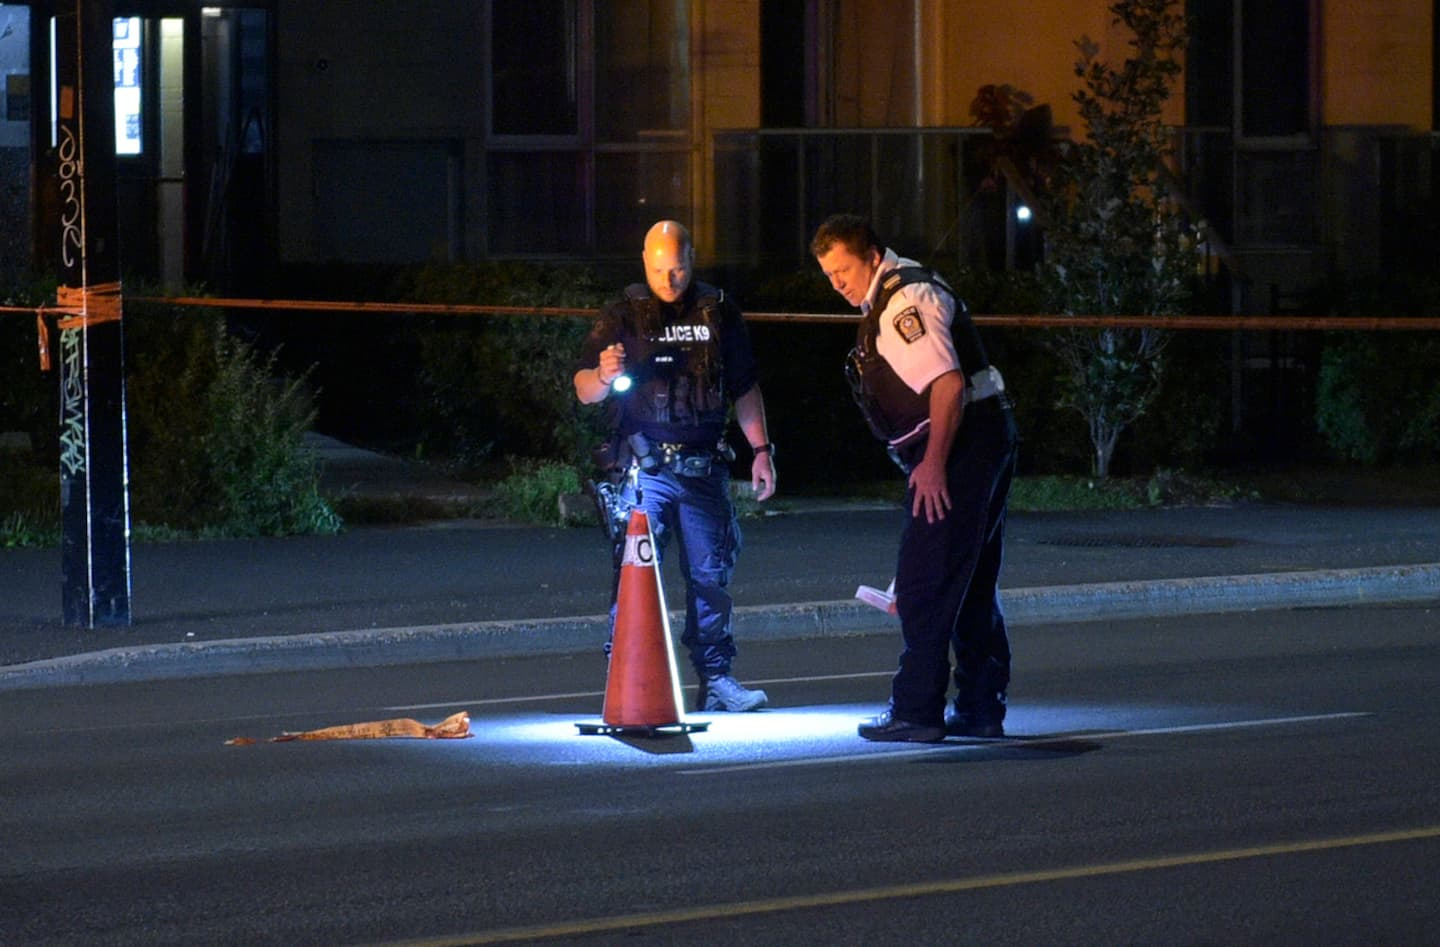 Attempted murder: a man shot in Montreal